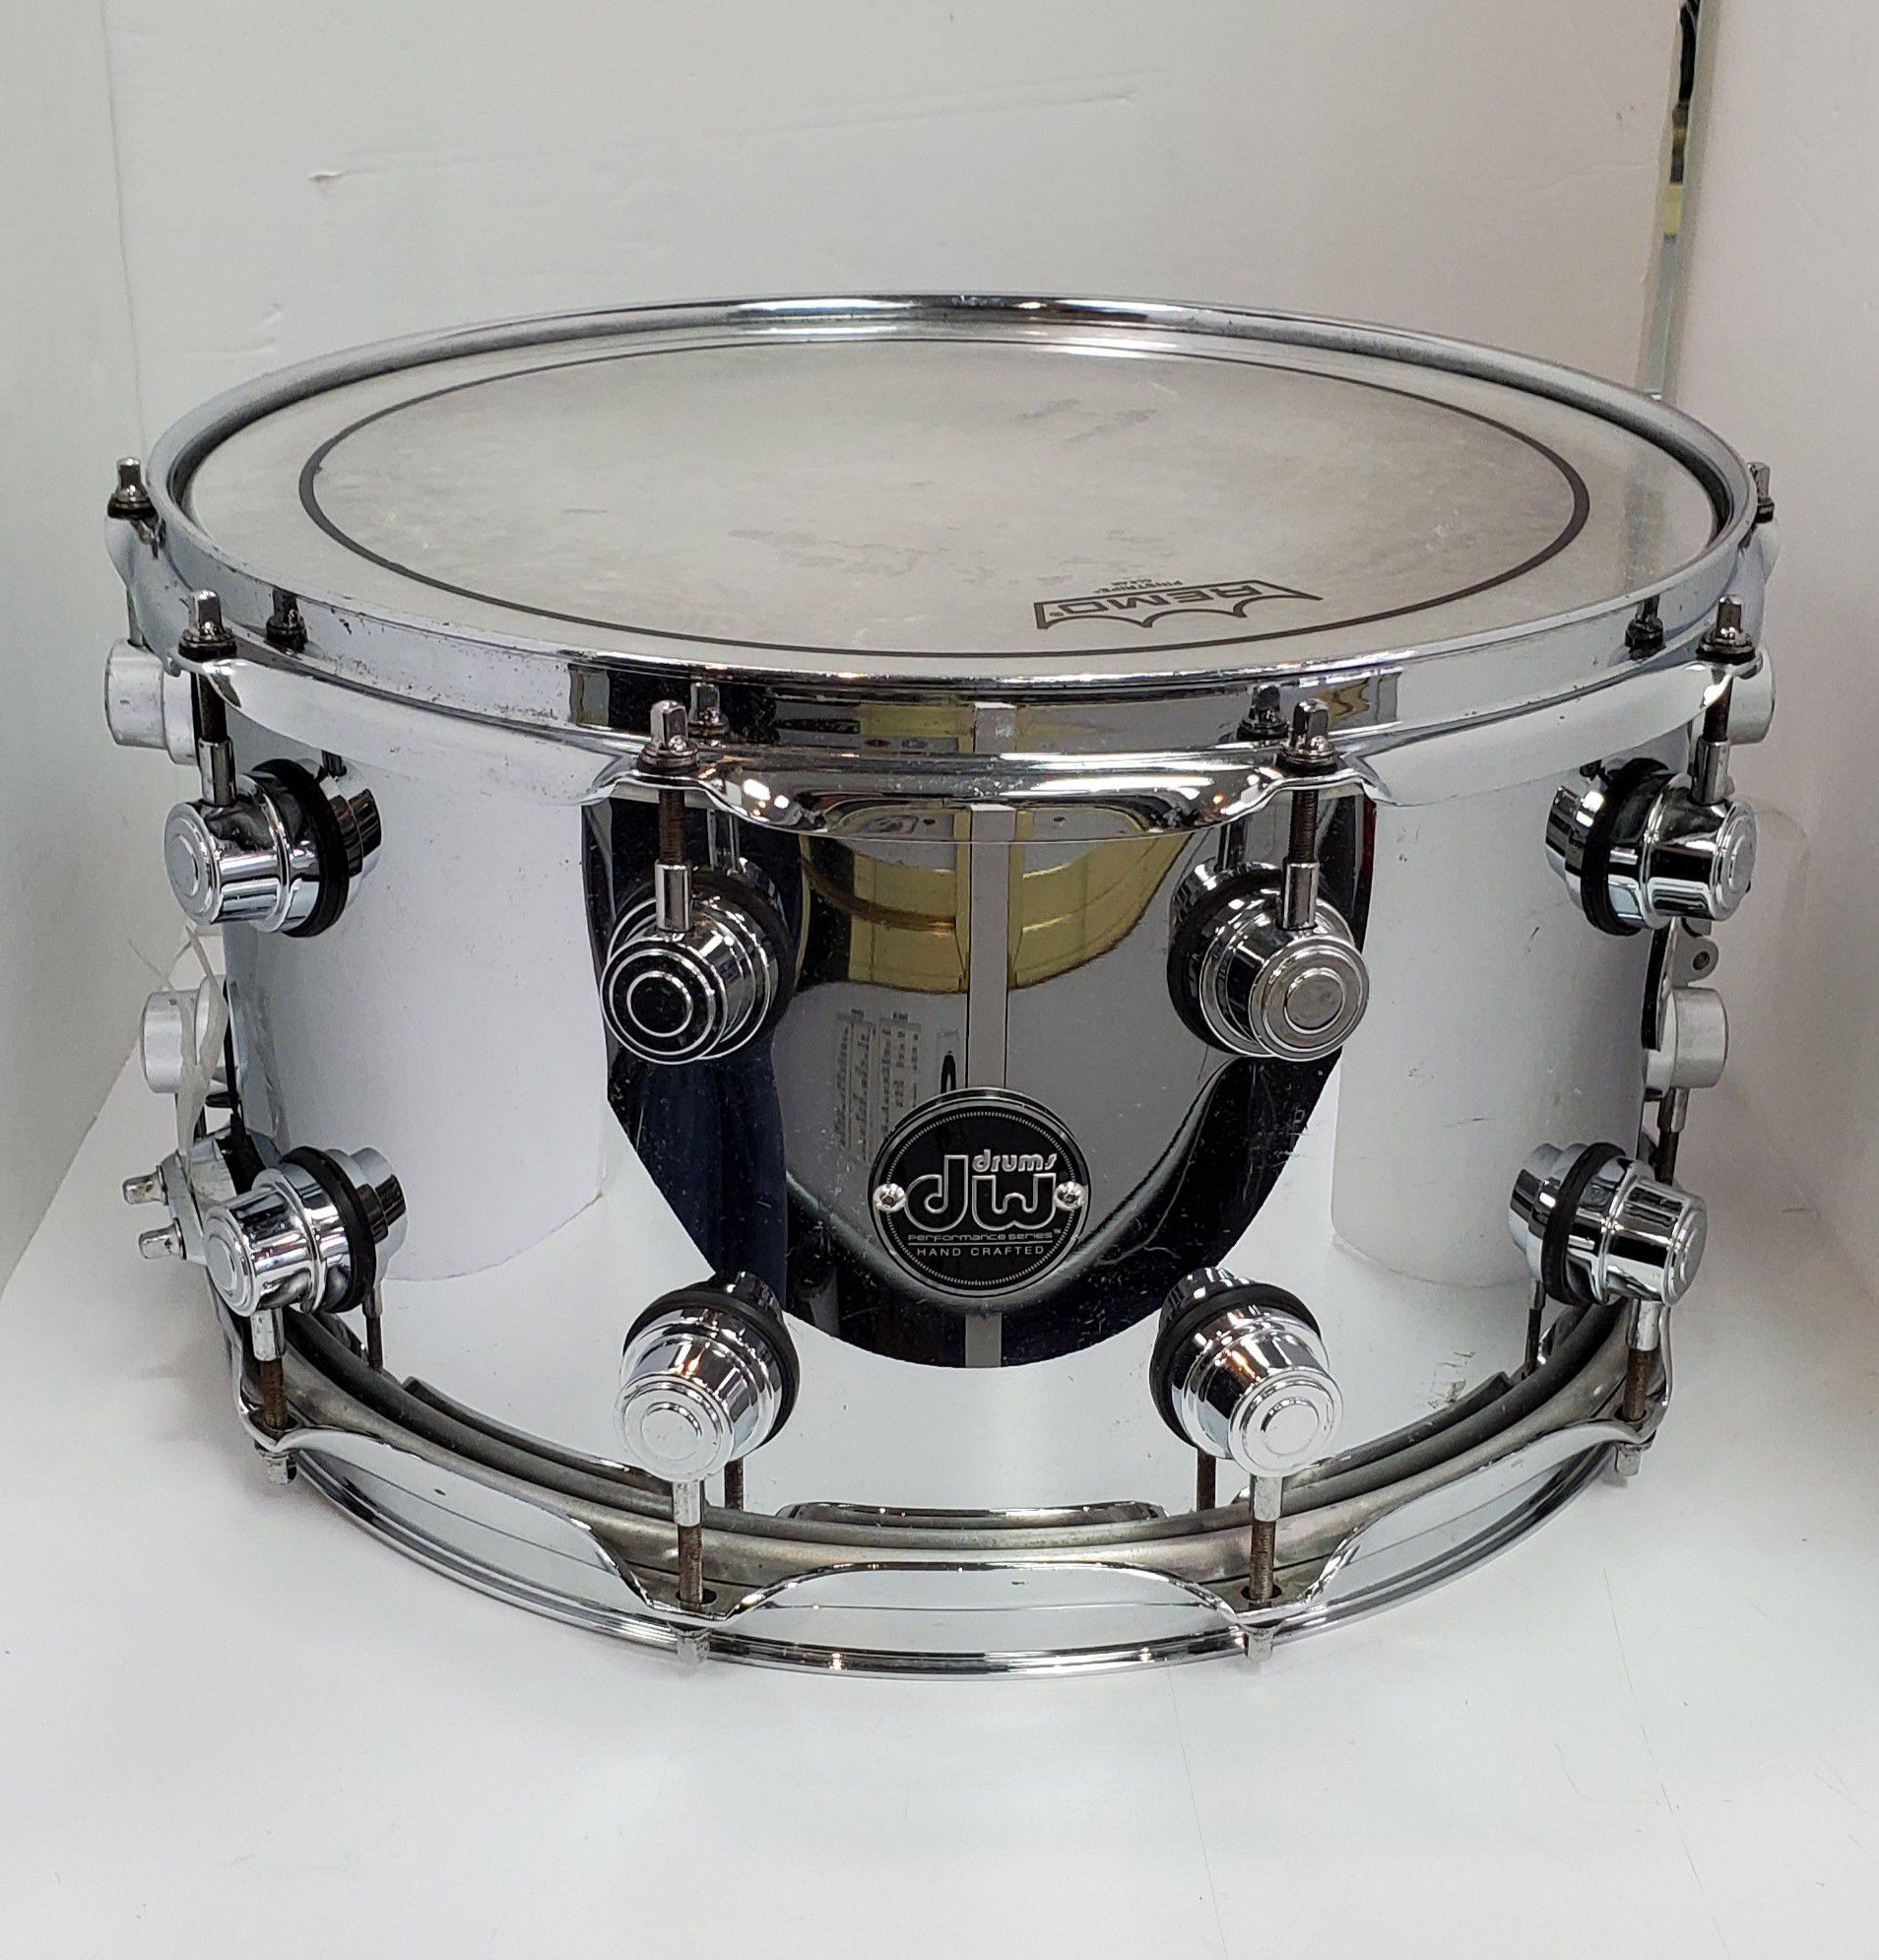 DW PERFORMANCE SERIES SINGLE SNARE DRUM.